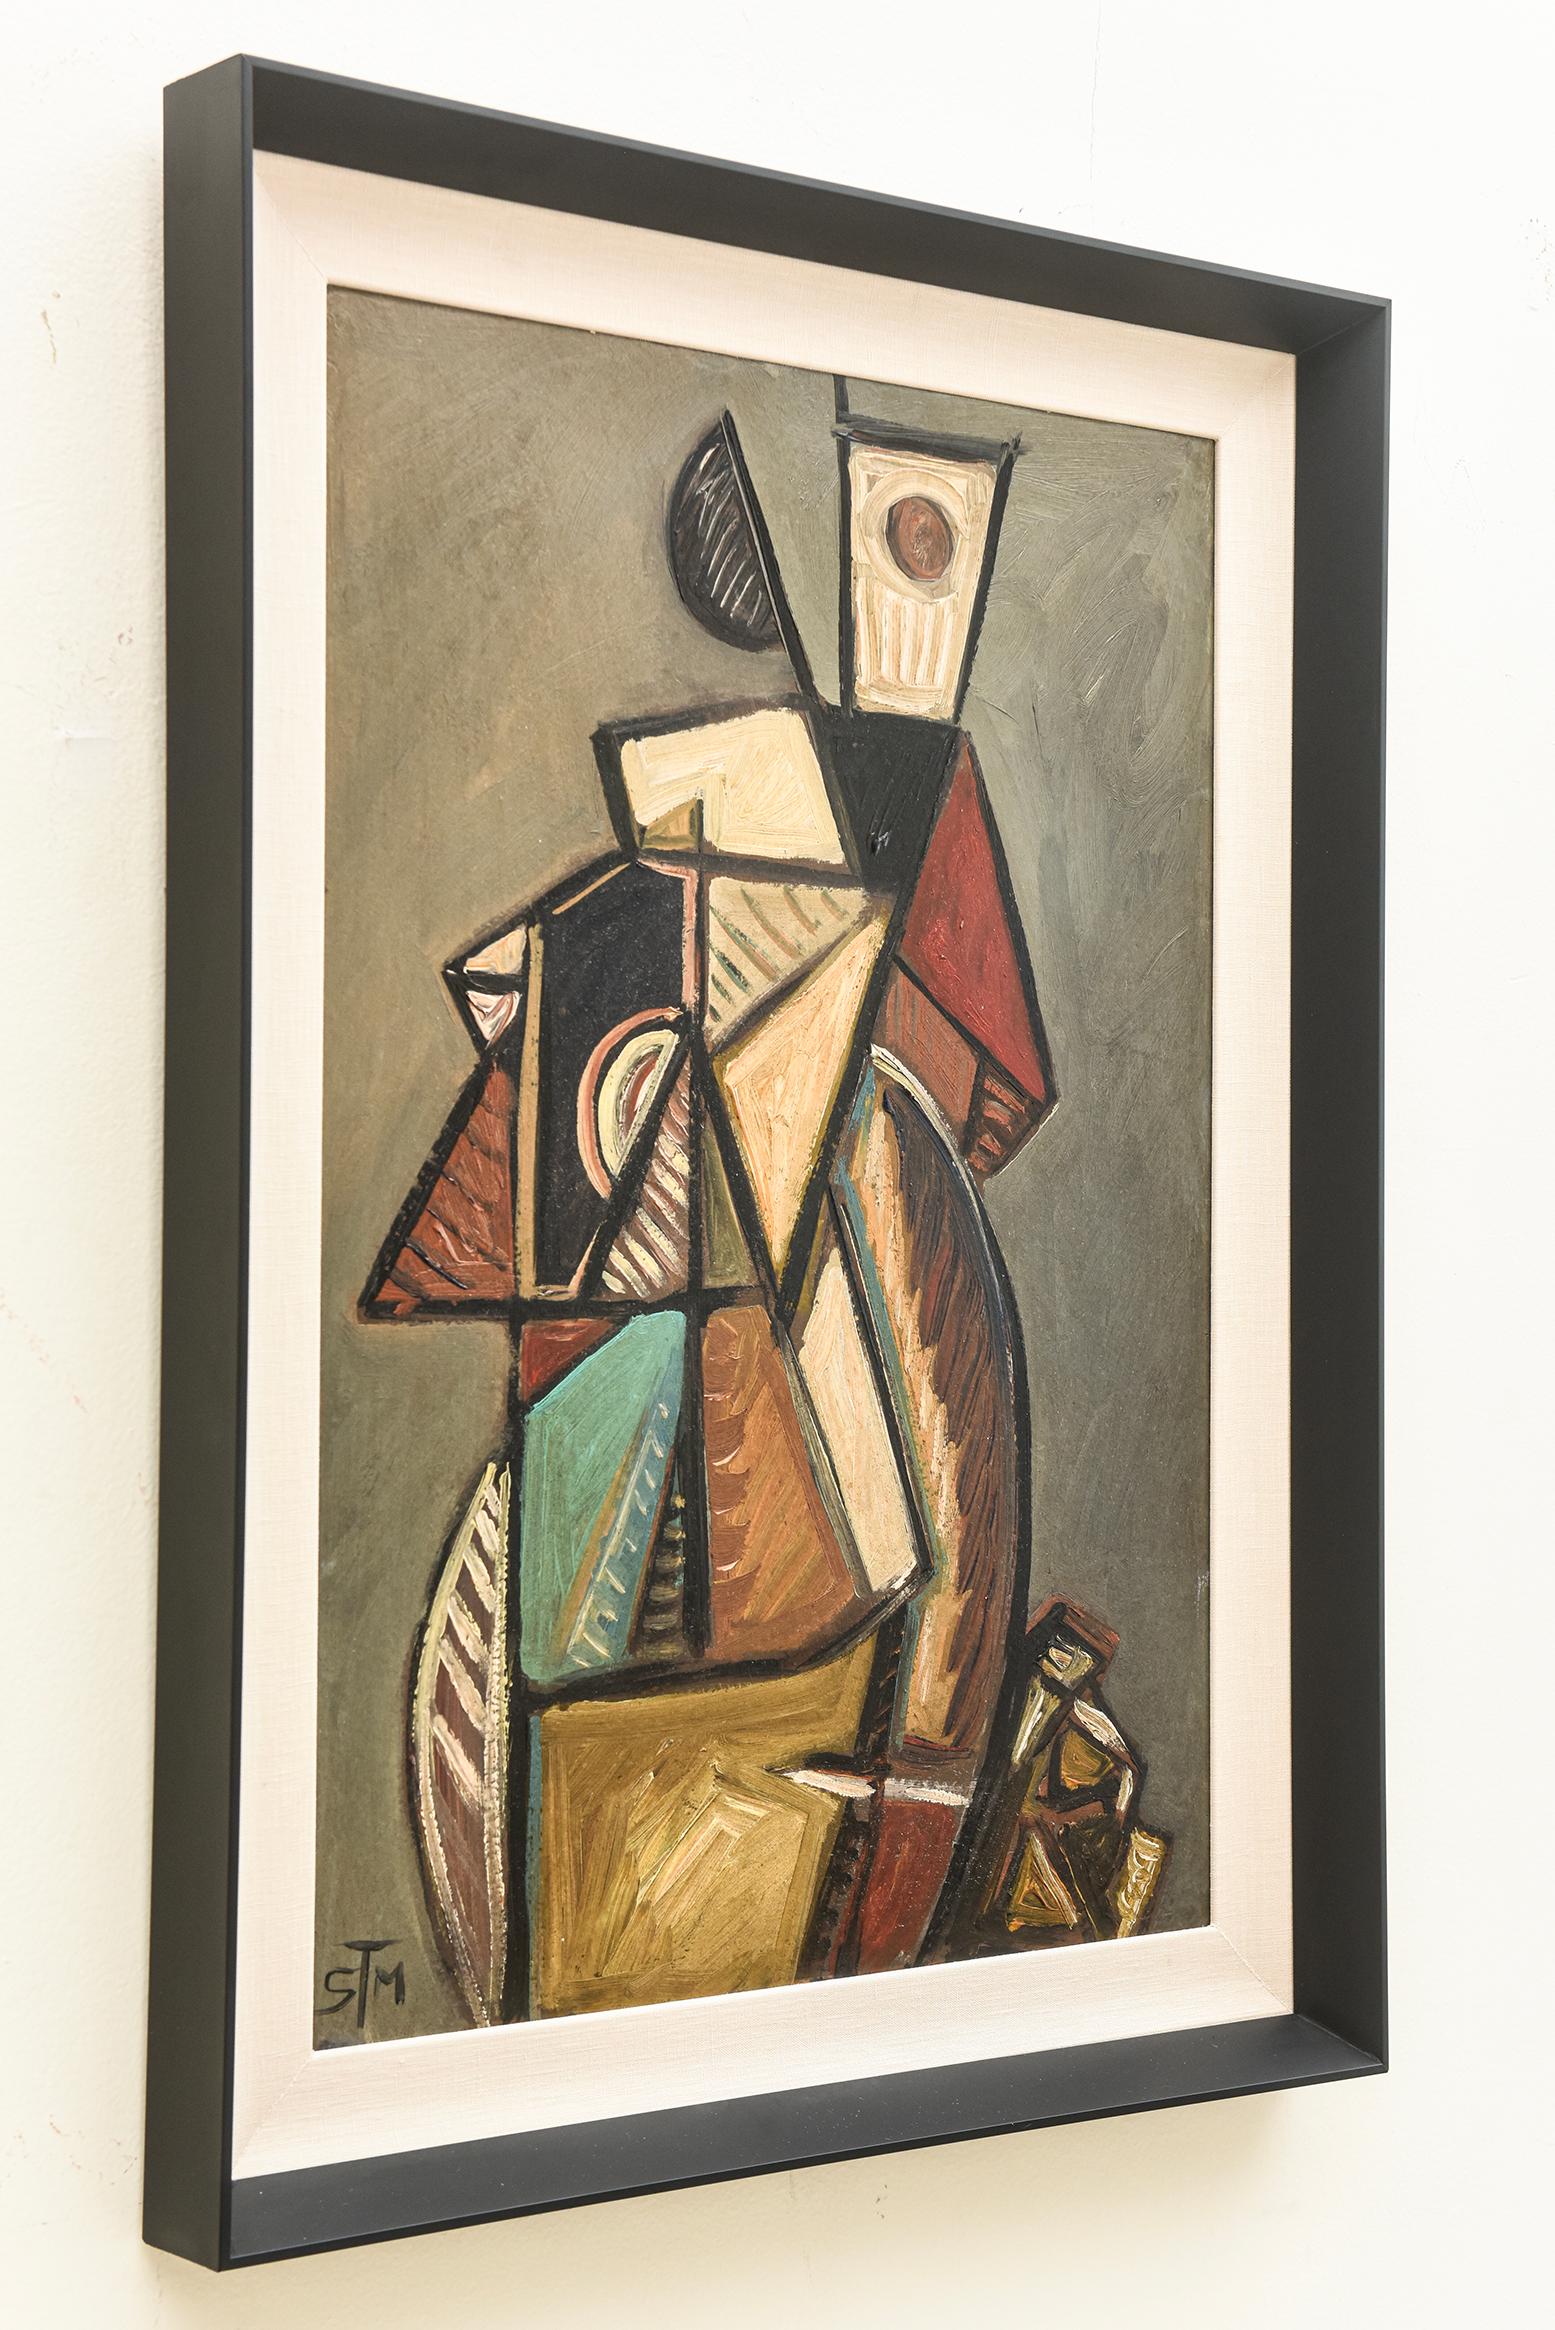 This cubist style vintage acrylic painting is abstract forms in beautiful tones. It is from Belgium and from the 60;s. It was just newly custom framed 2 weeks ago in a sleek black wood framed with an off white linen liner. This just enhanced the